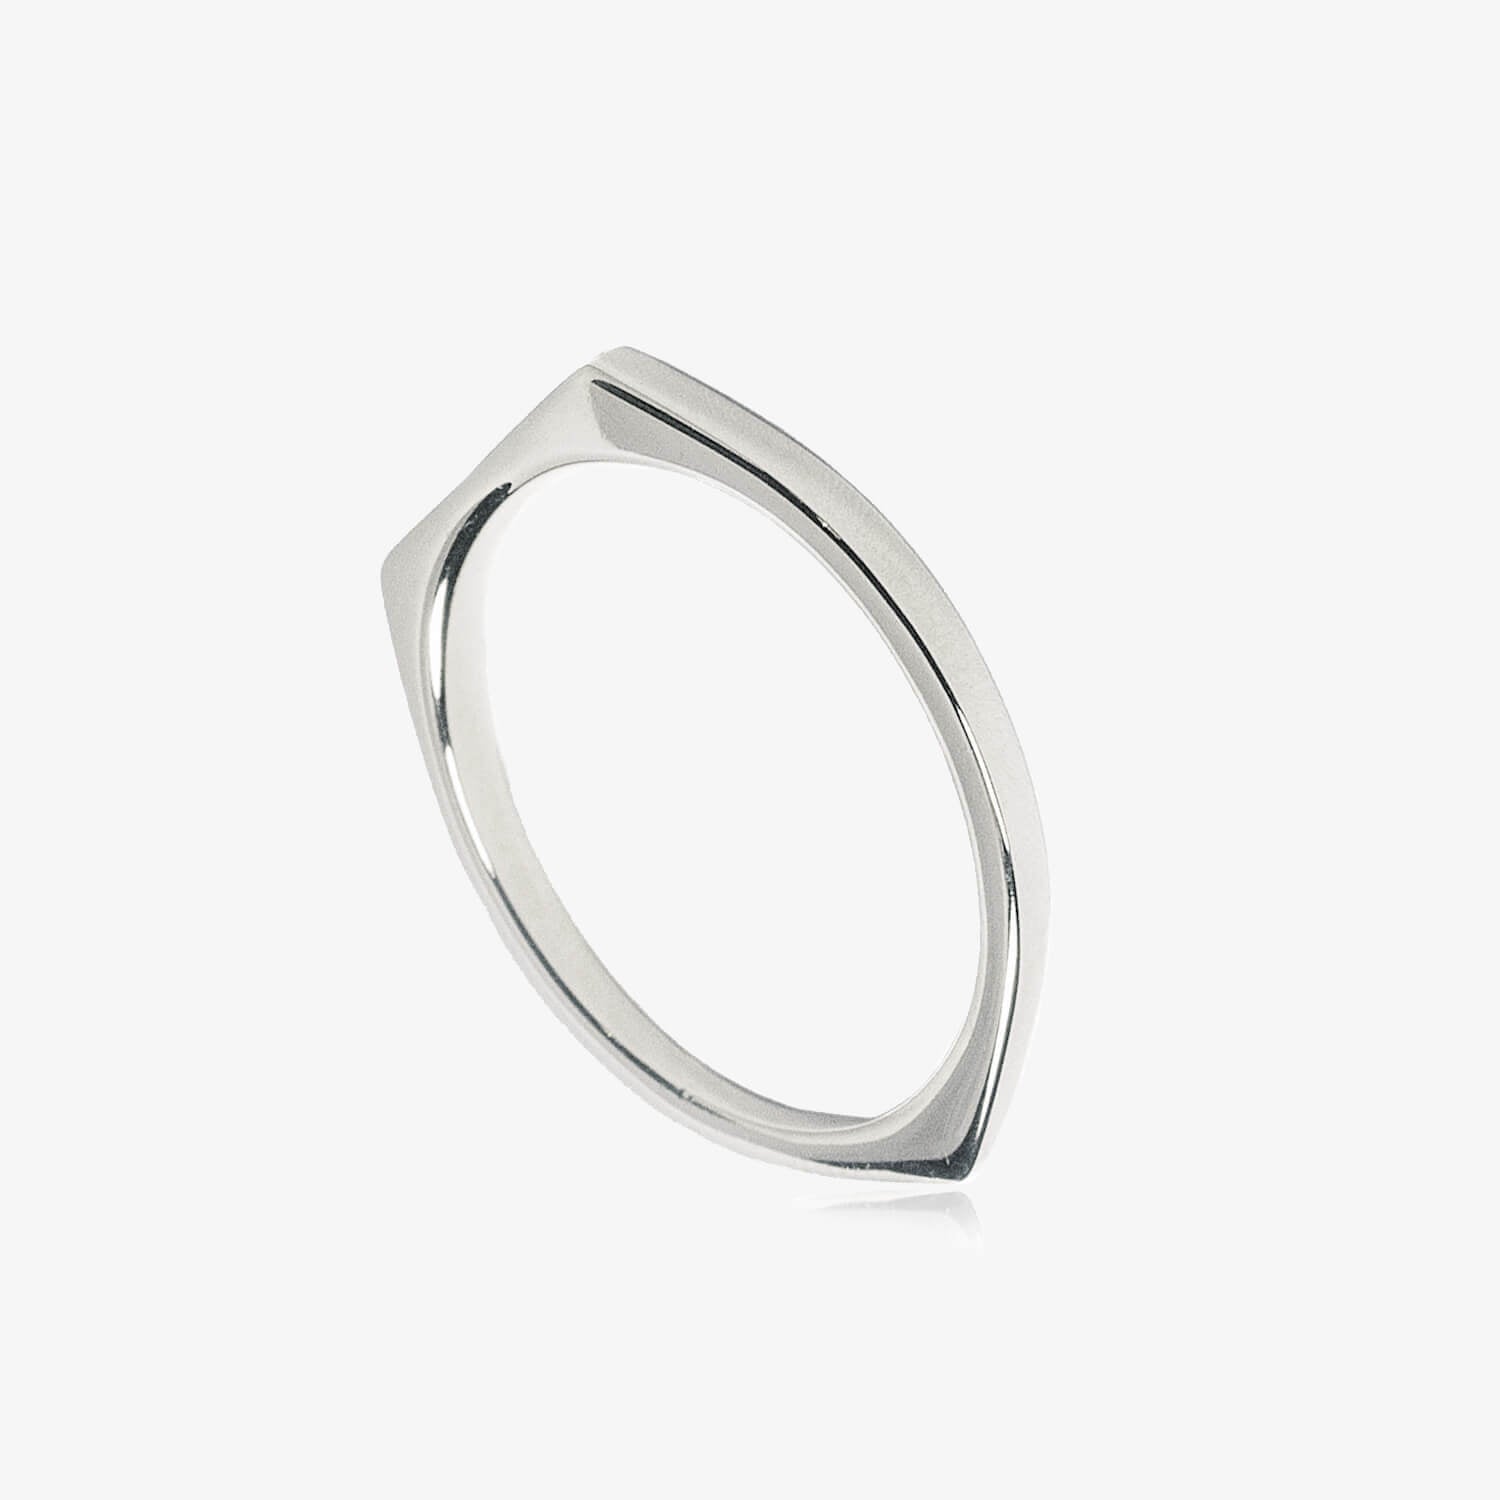 A thin silver signet ring tapering to a point at the bottom